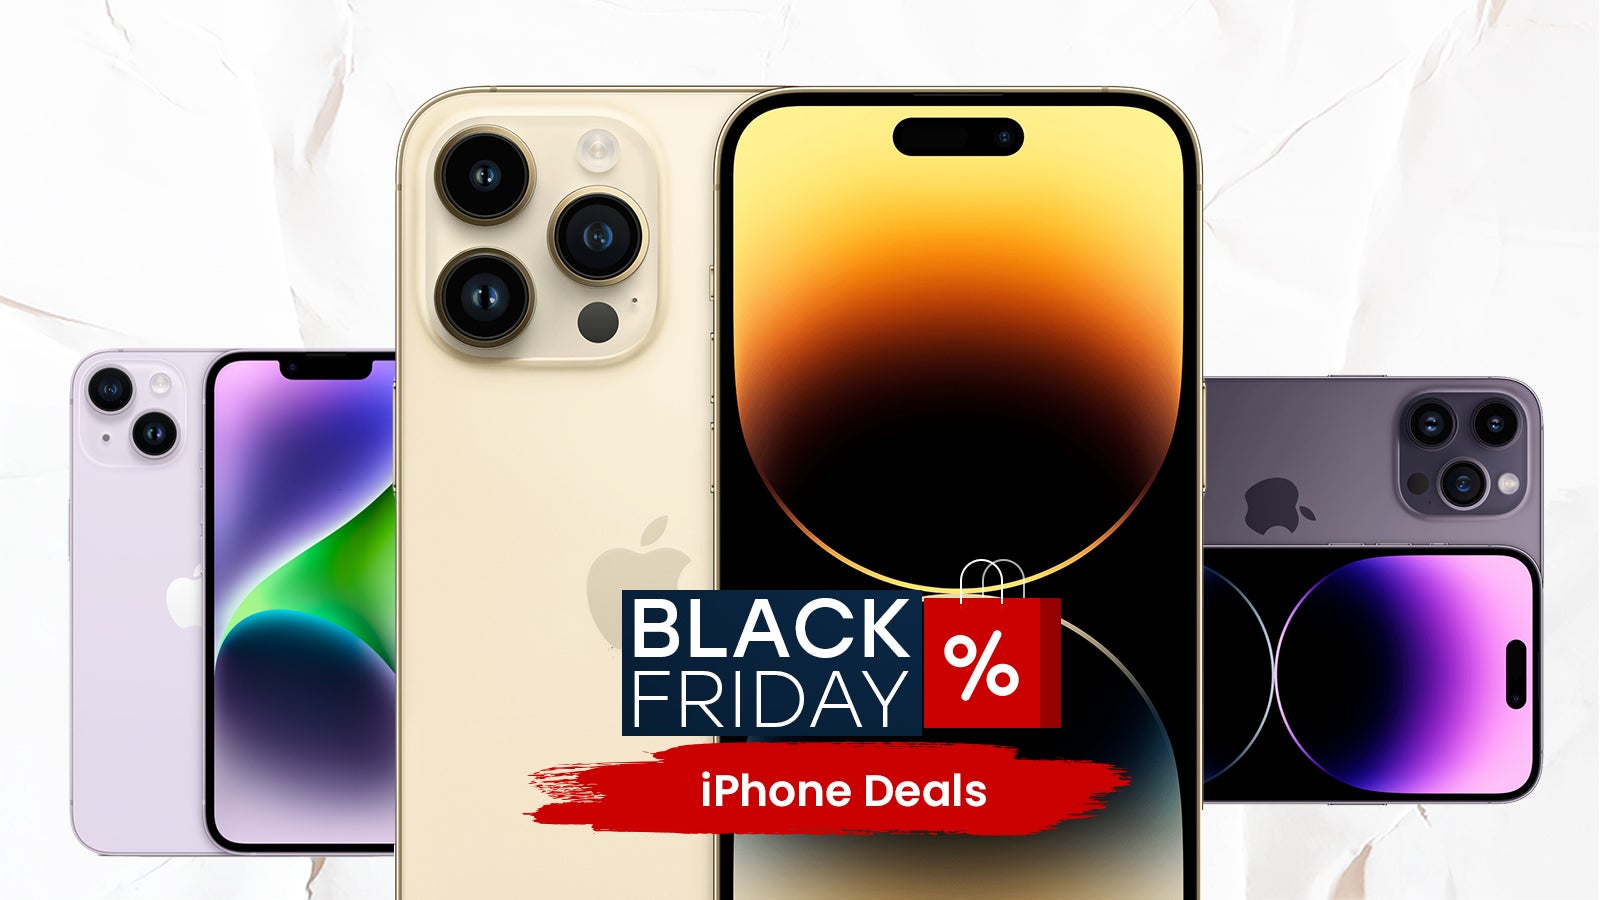 The Black Friday 2021 iPhone deals to expect PhoneArena